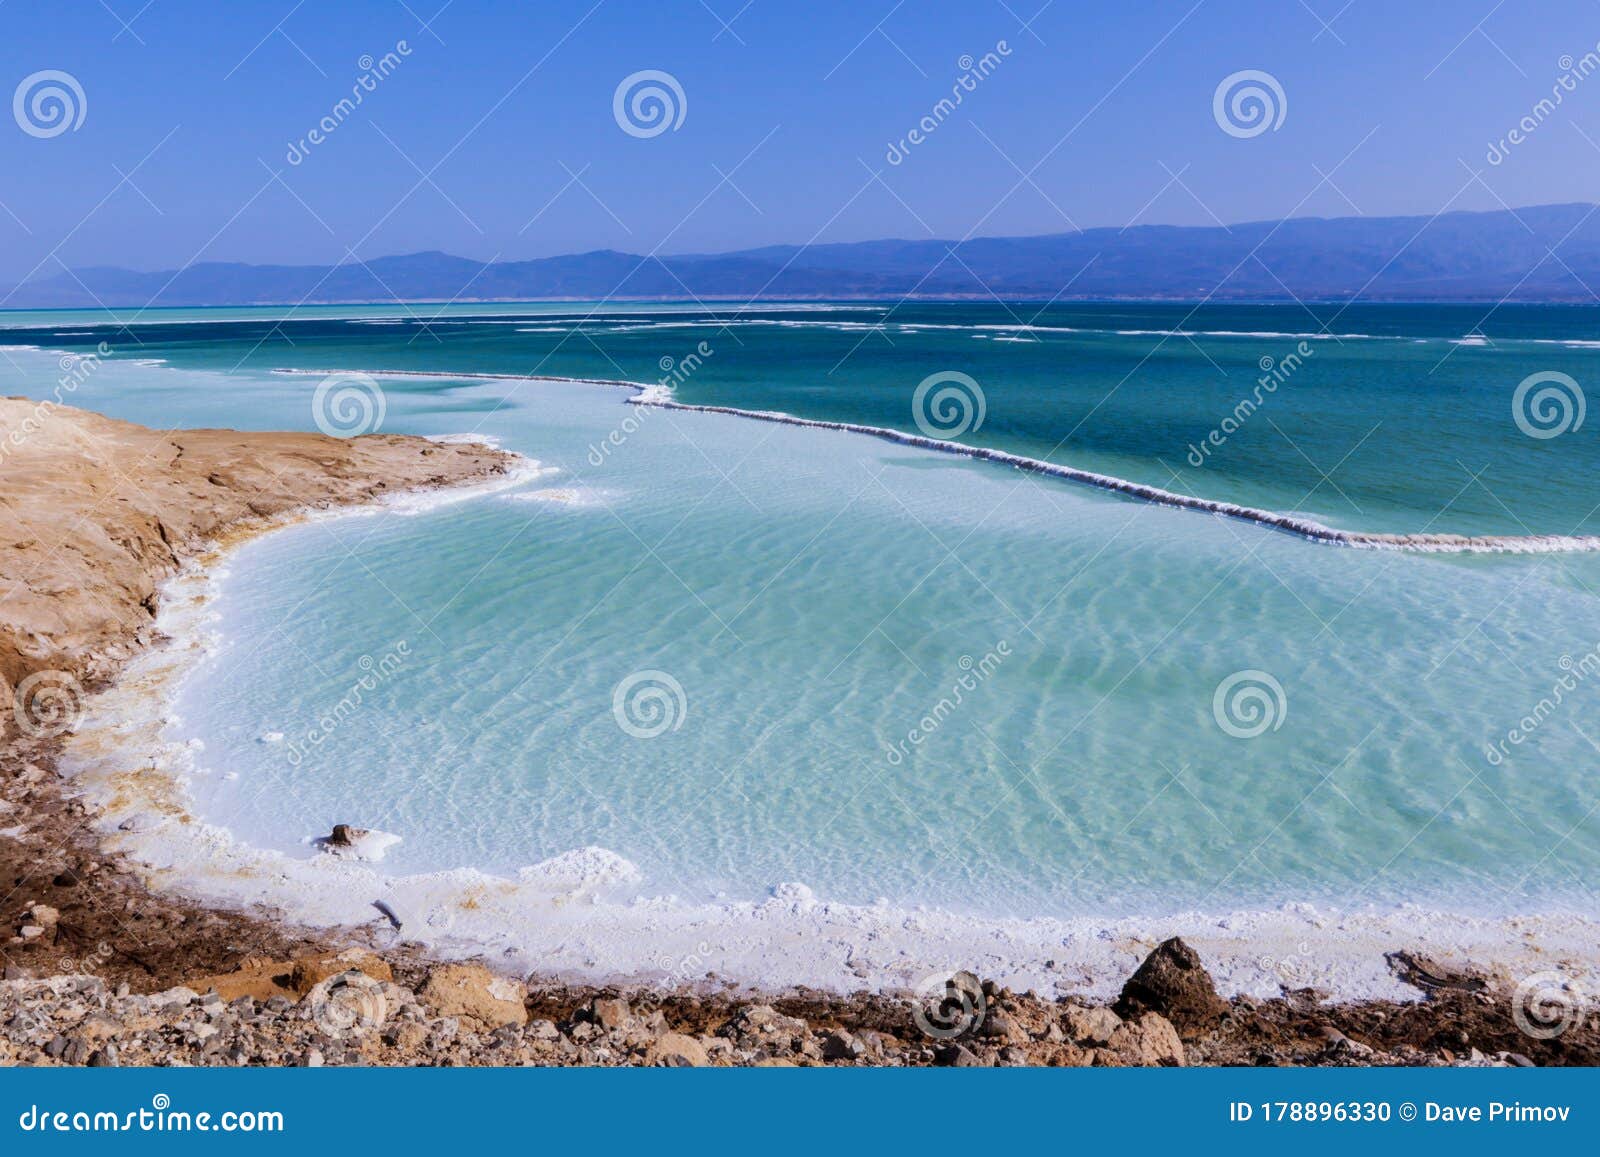 view to the salty surface of the lake assal, djibouti